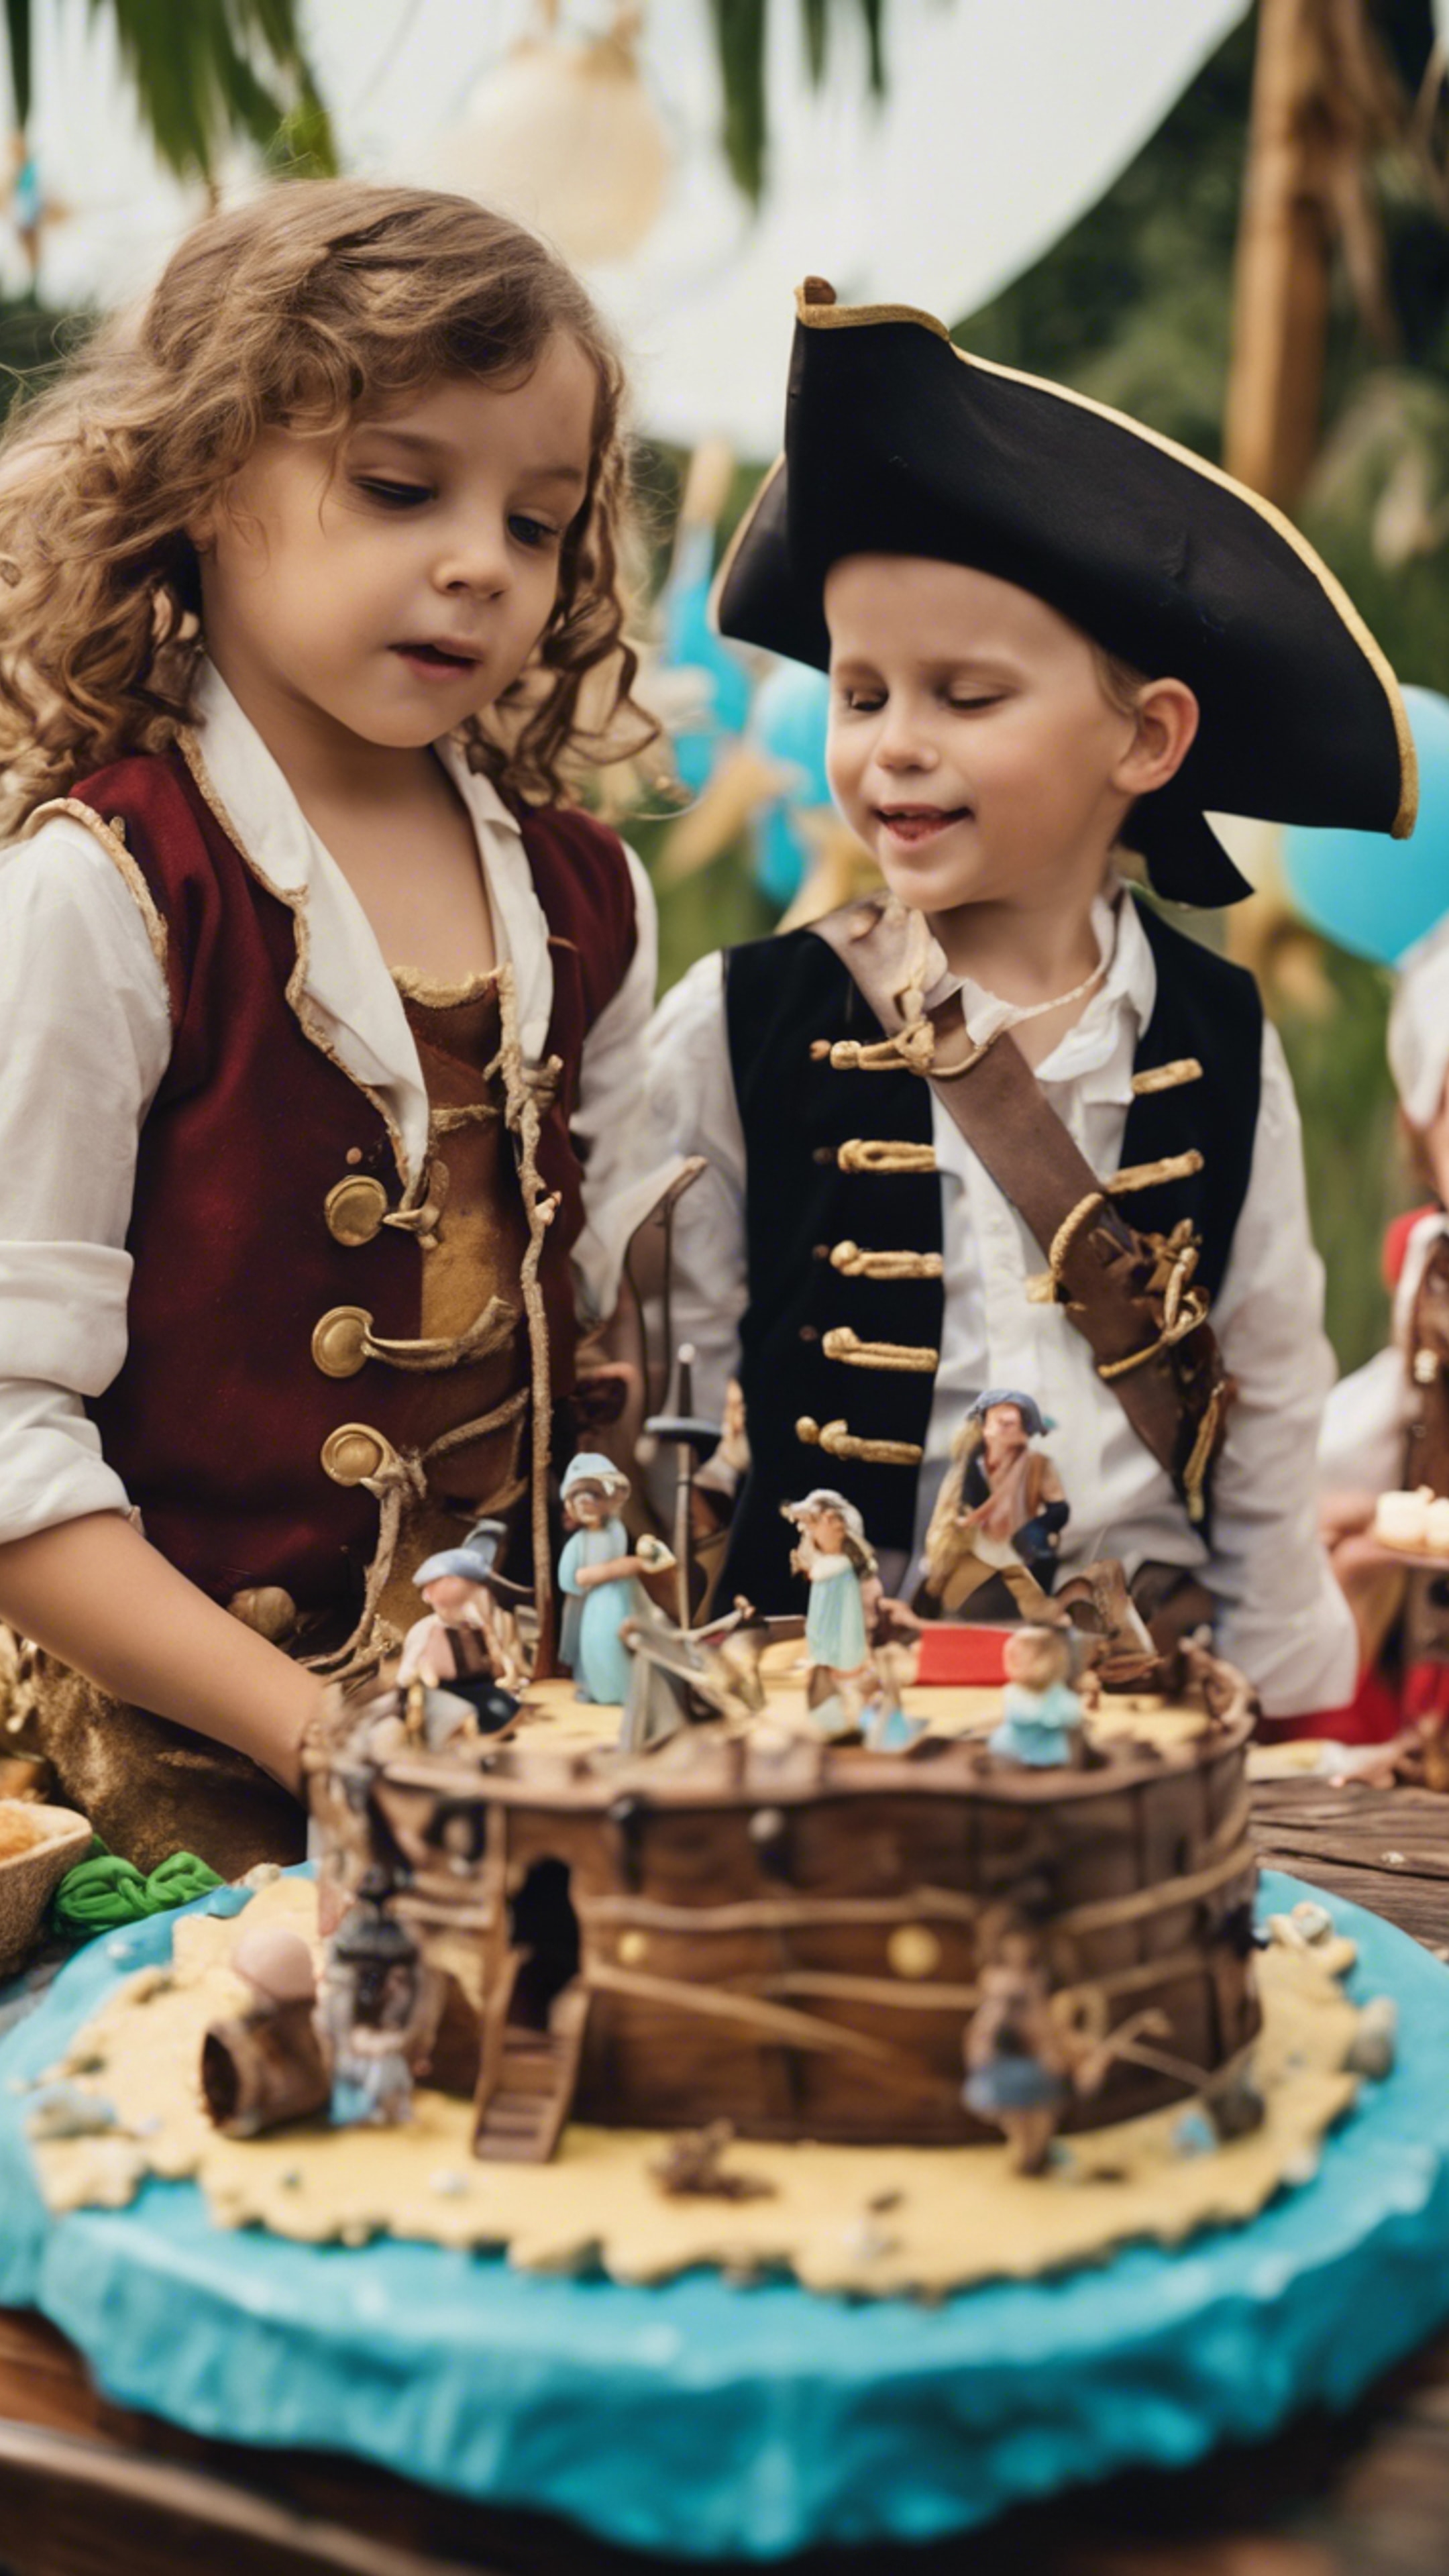 Children's pirate-themed birthday party with a treasure map, pirate ship cake and kids dressed as pirates. Ταπετσαρία[fc1a6e05b86643309d7a]